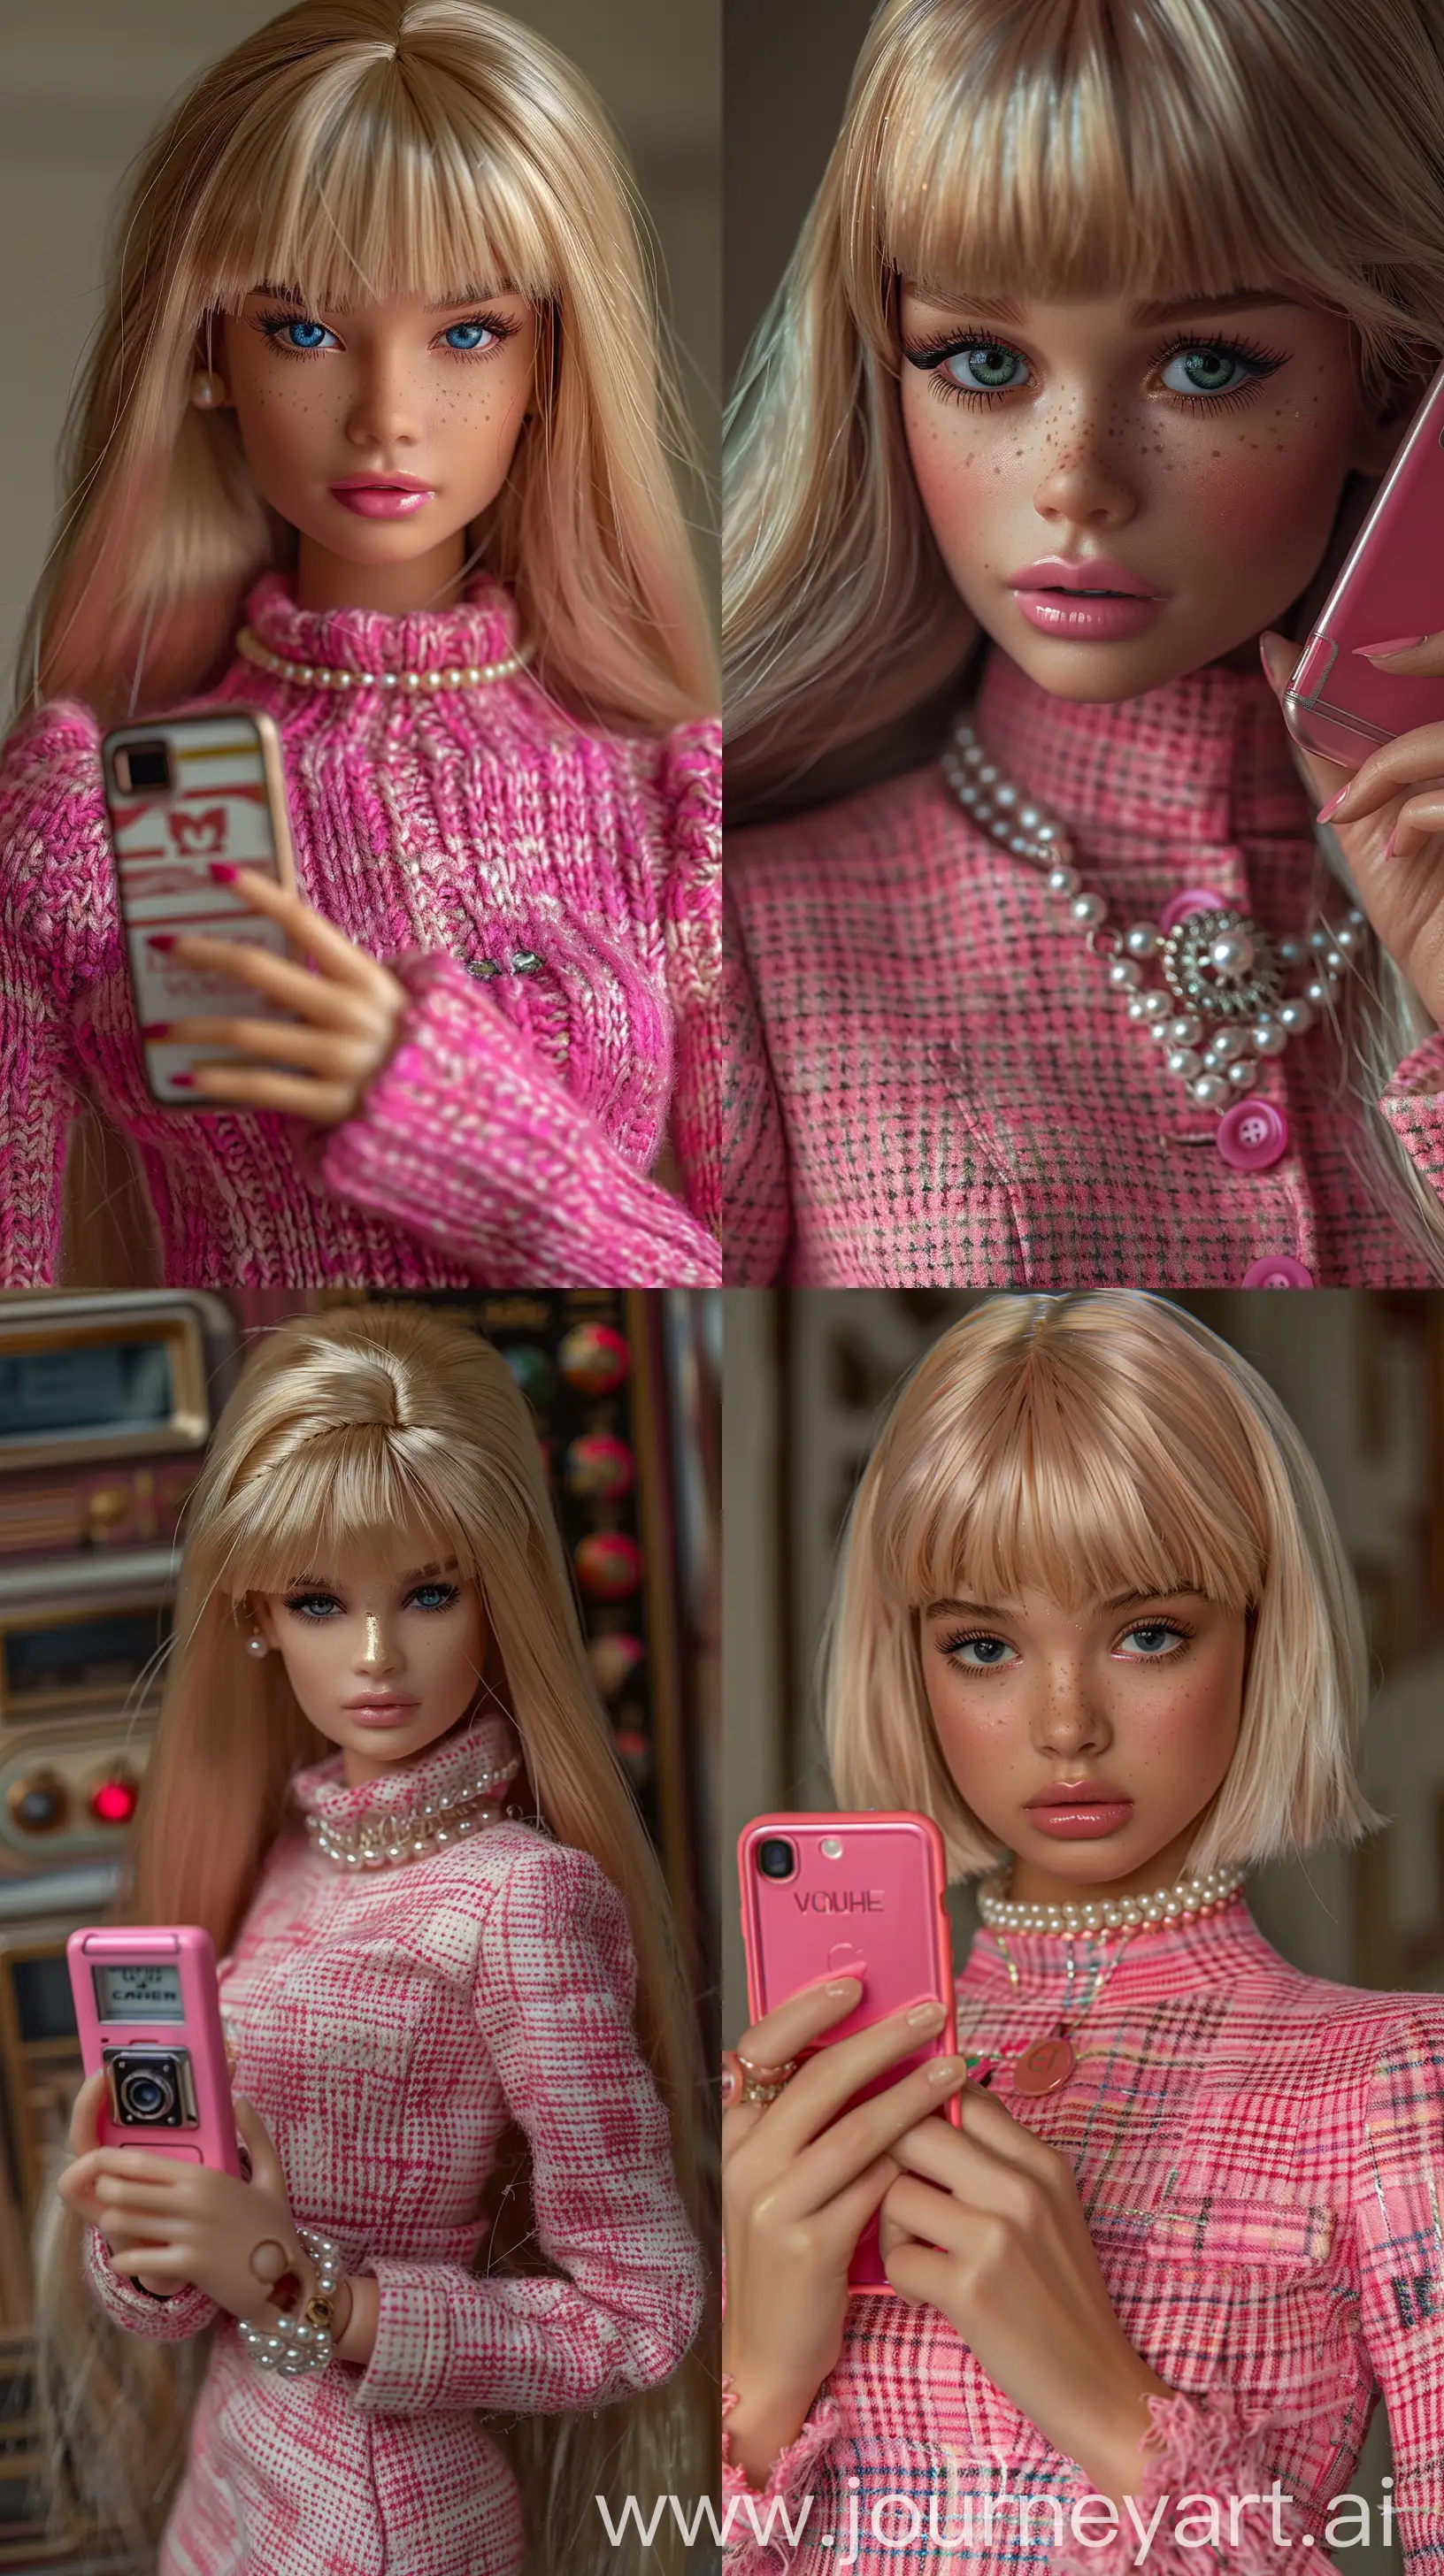 Fashion-Model-in-Barbie-Outfit-with-Chanel-Dress-and-Accessories